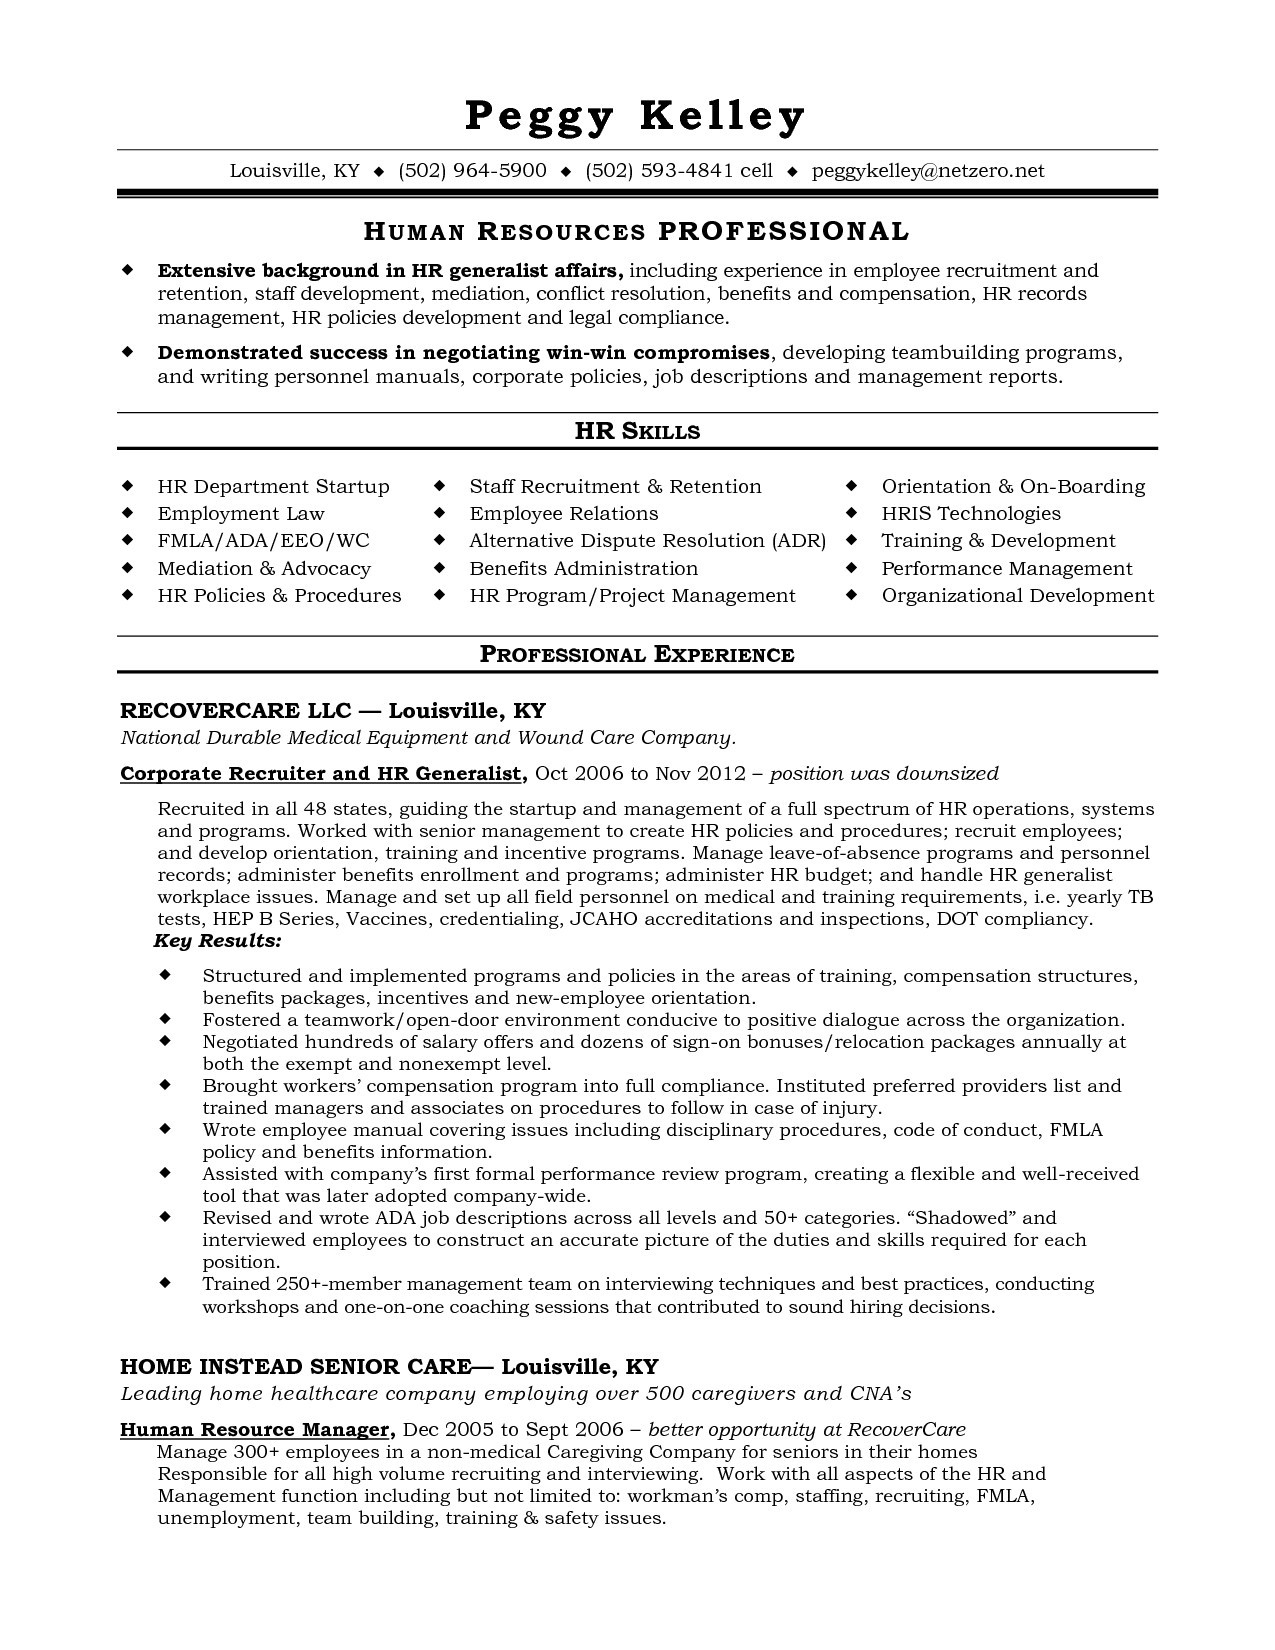 Human Resources Resume Resume Bullet Points For Human Resources Valid Human Resource